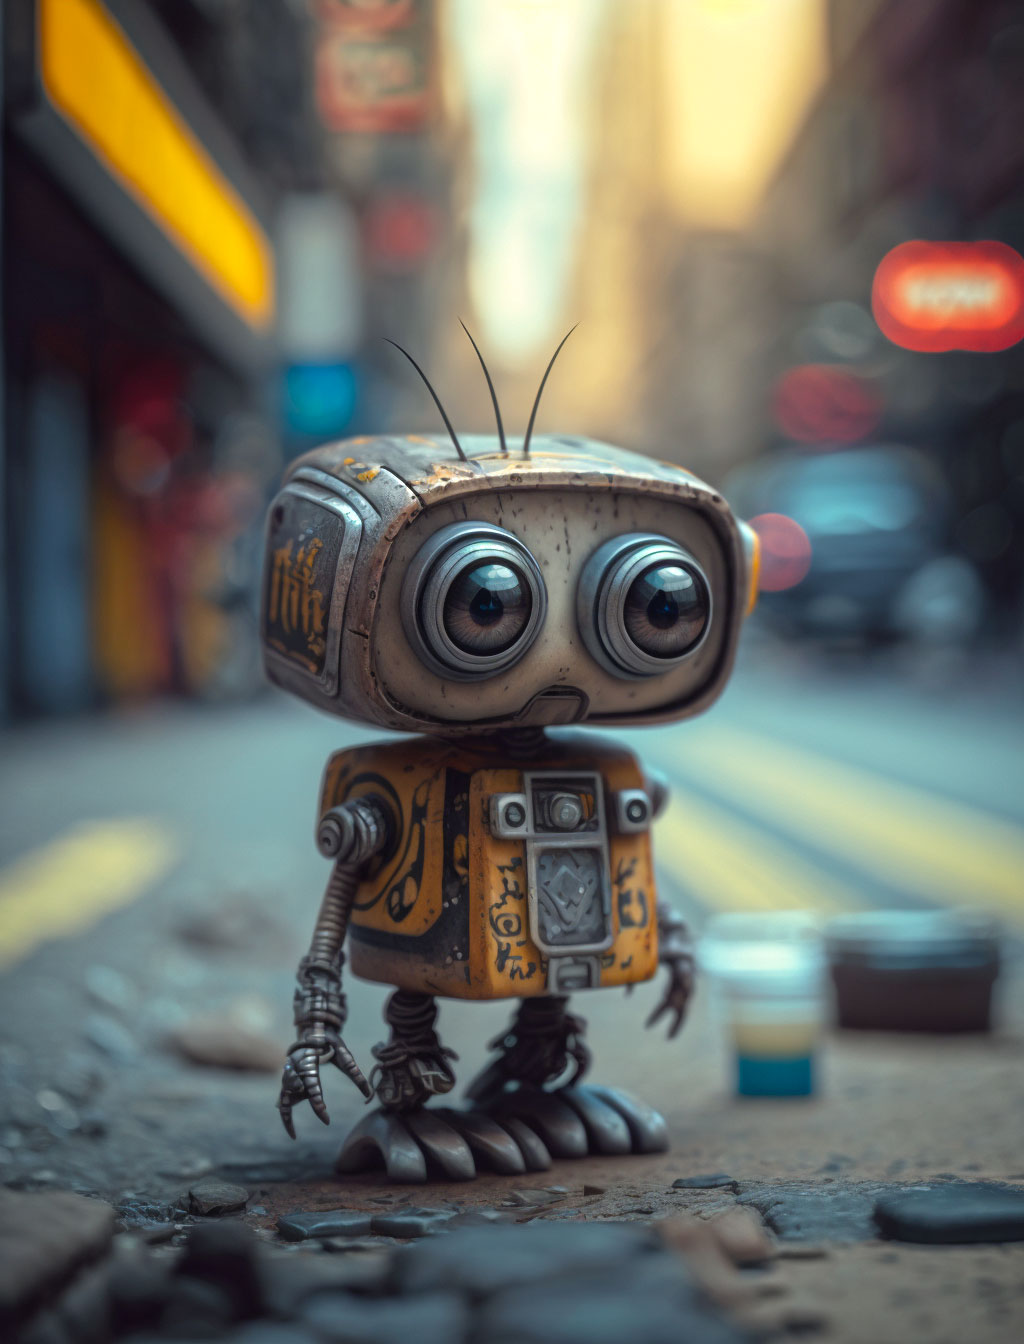 litte robot lost in the big city